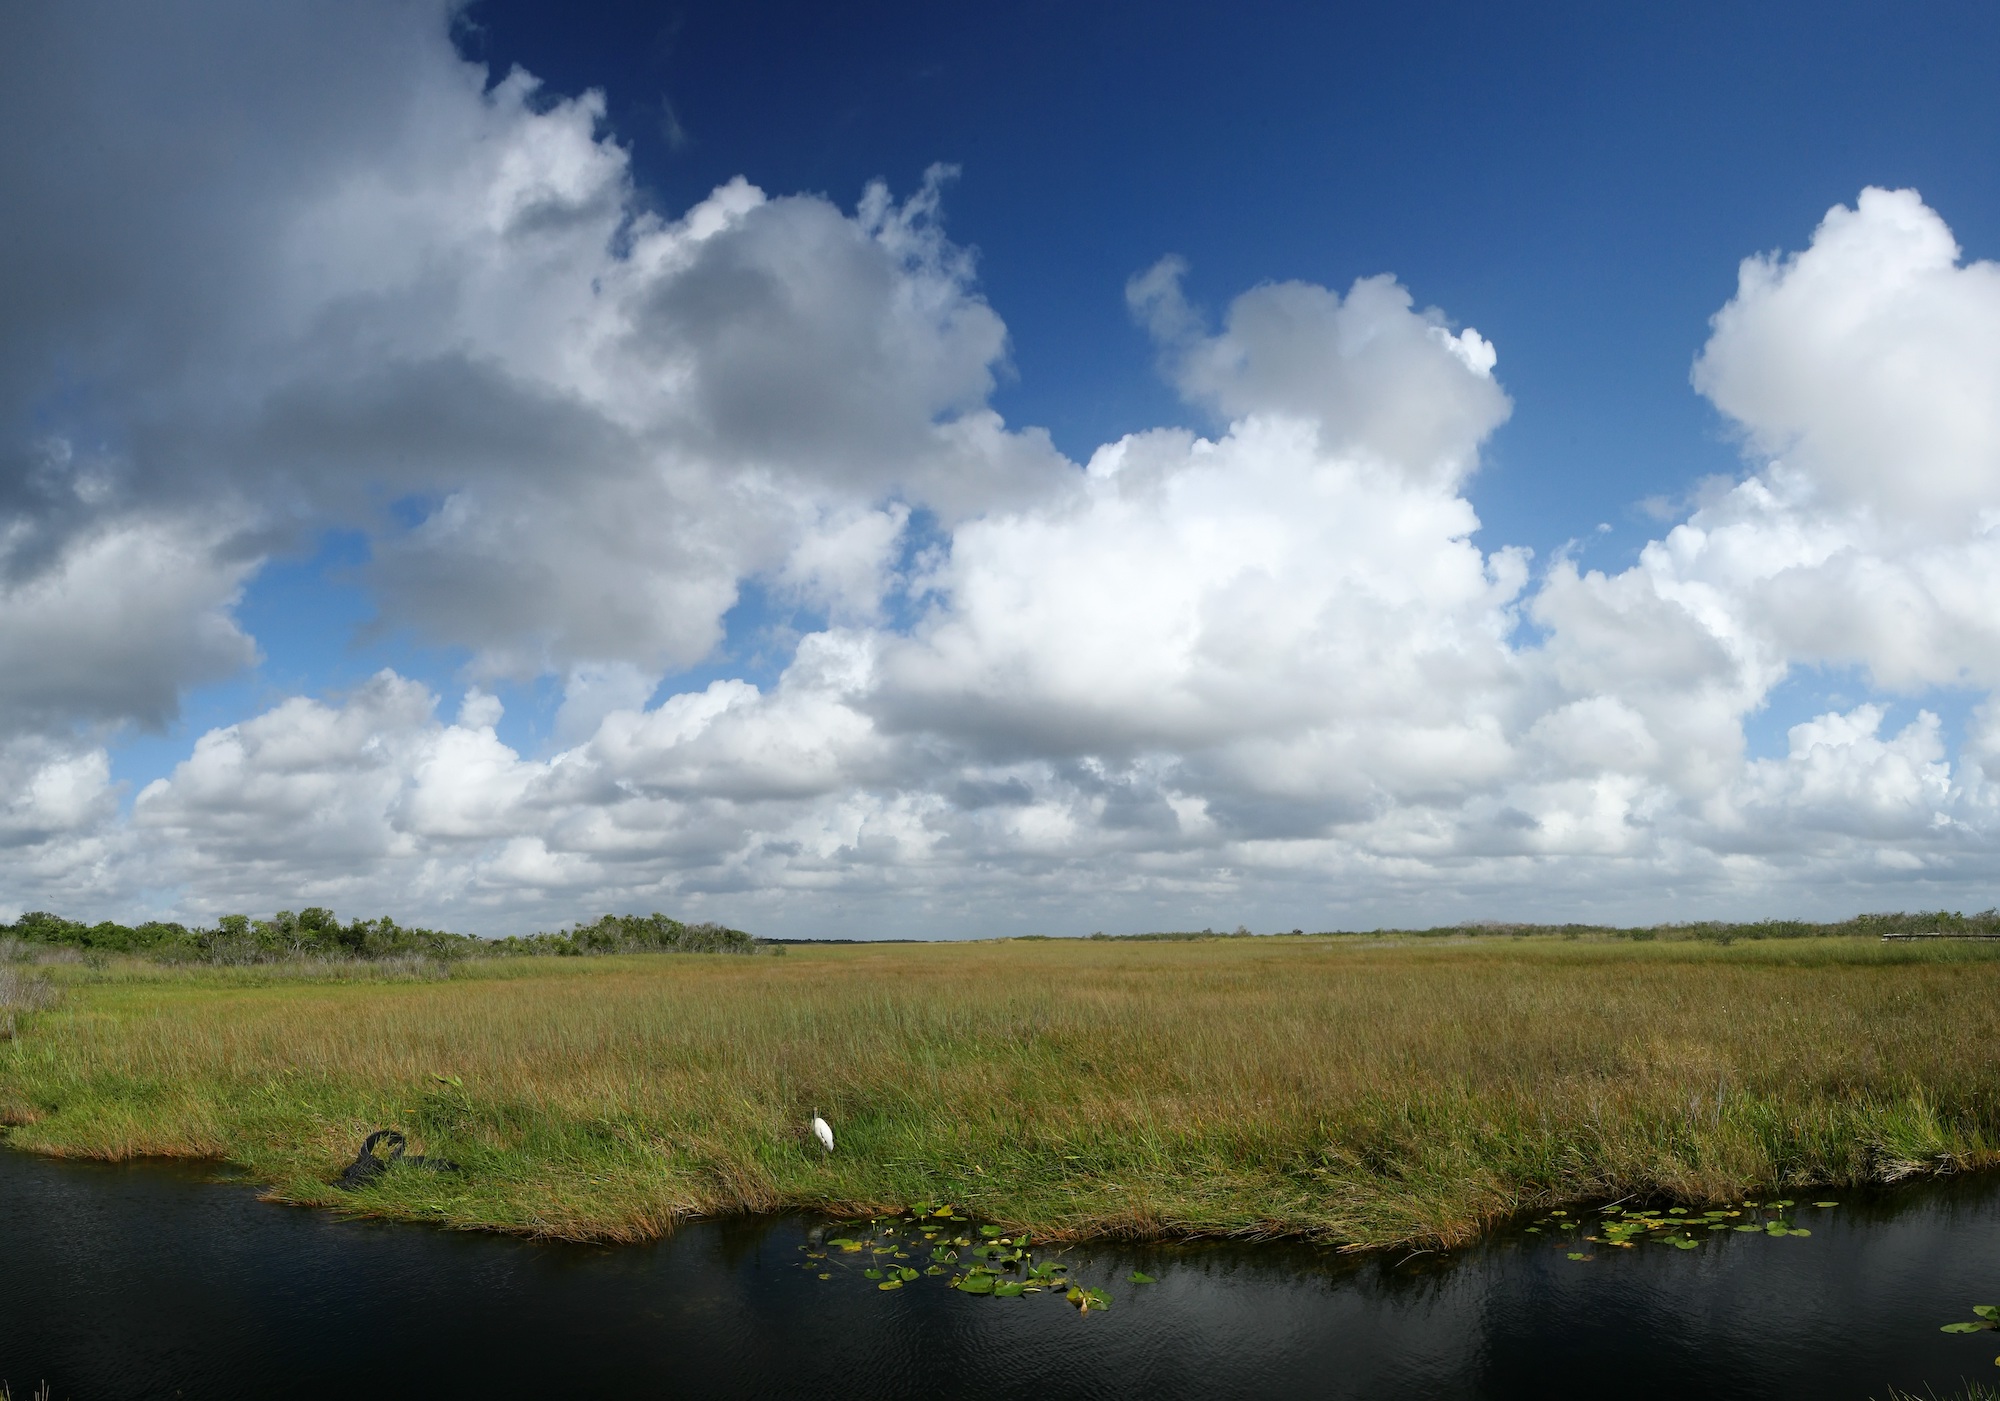 grassy swamp and blue sky with a white bird in the foreground